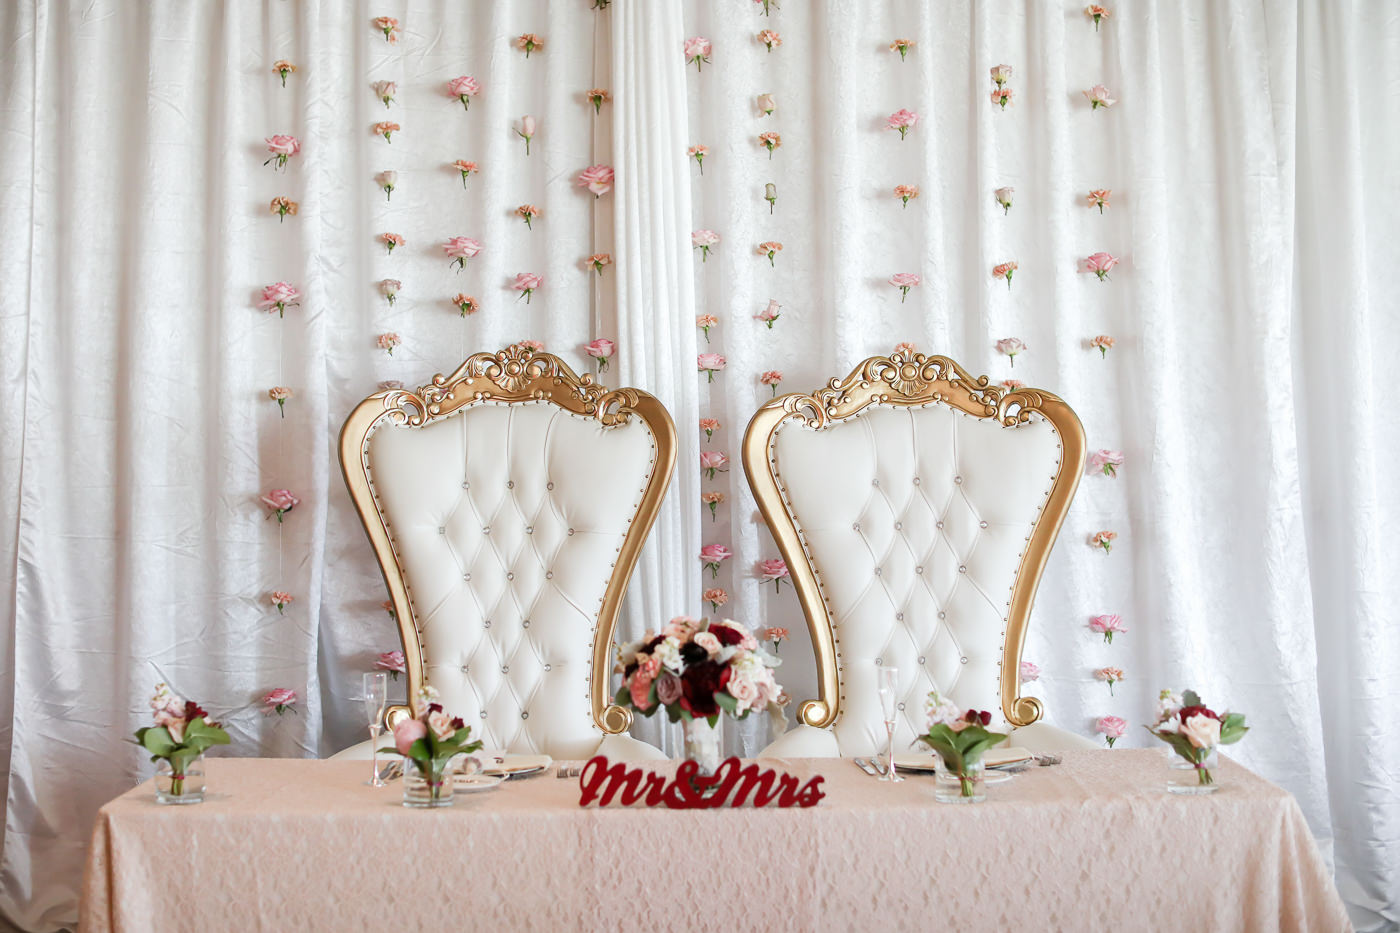 Romantic Antique Gold and Ivory Cushion Chairs, Sweetheart Table with Dusty Rose Table Linen, Red Mr and Mrs Sign, White Draping with Blush Pink Hanging Flowers | Wedding Photographer Lifelong Photography Studios | Tampa Bay Wedding Planner Blue Skies Weddings and Events | St. Petersburg Hotel Wedding Venue The Birchwood | Over the Top Rental Linens